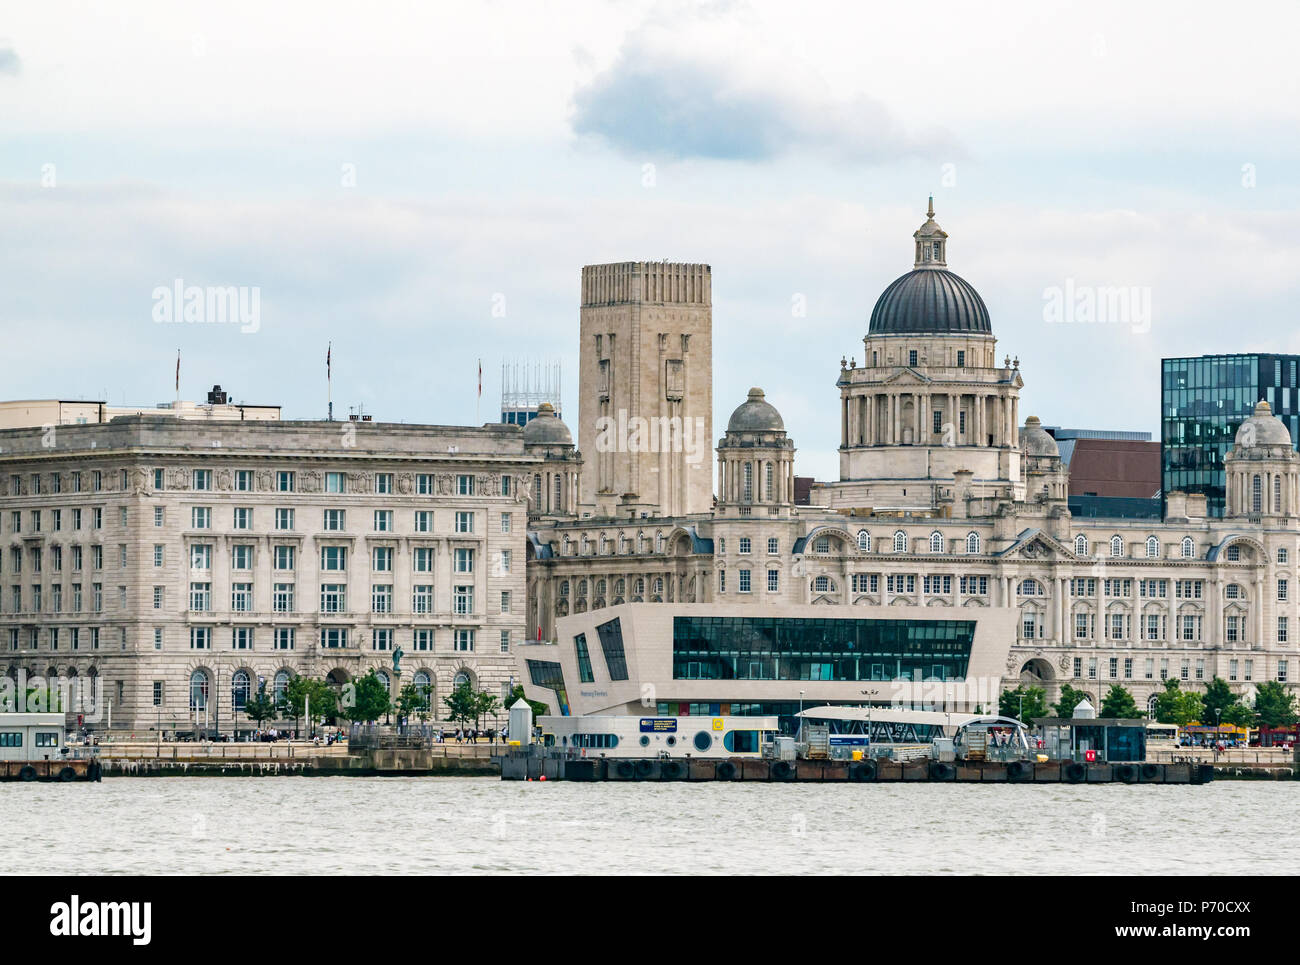 The Three Graces, Port of Liverpool building, Cunard Building and Museum of Liverpool and Georges Dock tower, Pier Head, Liverpool, England, UK Stock Photo